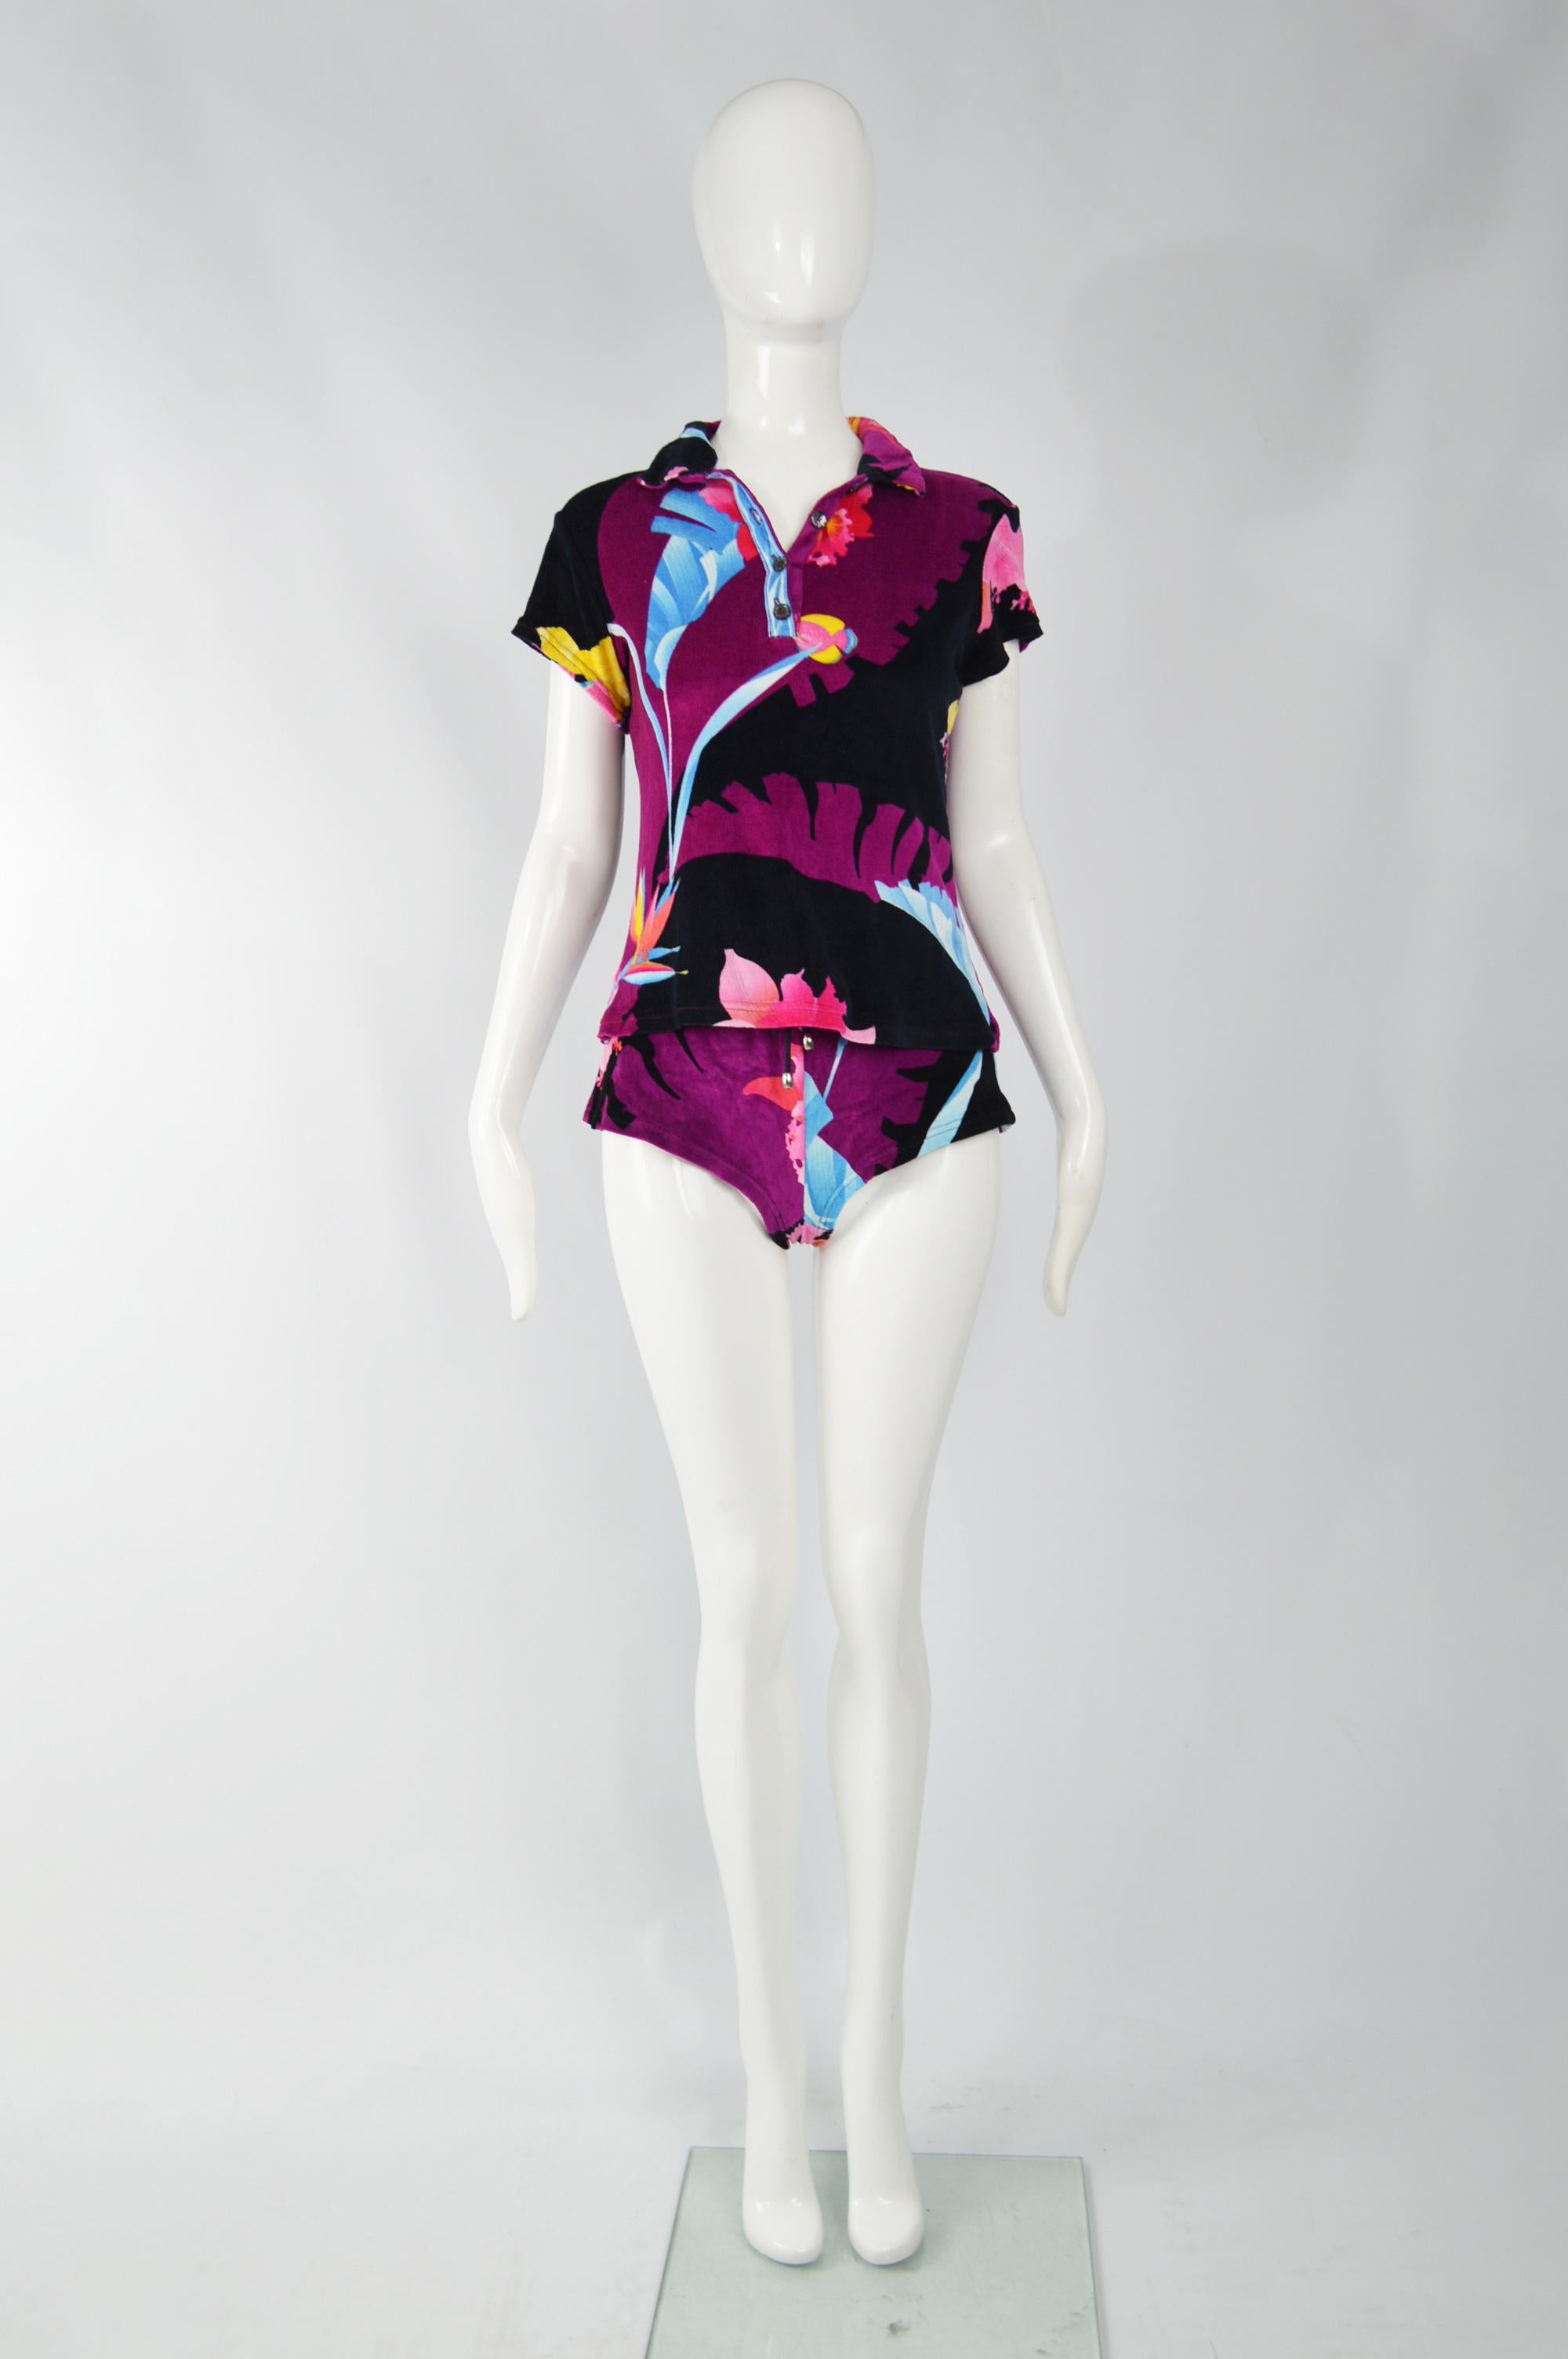 A super cute vintage womens two piece shorts and t shirt suit 2 piece ensemble by Leonard Paris. In a purple, black and white tropical printed velour / stretch velvet fabric. The shorts have a sexy, hot pants silhouette and the top has a polo shirt